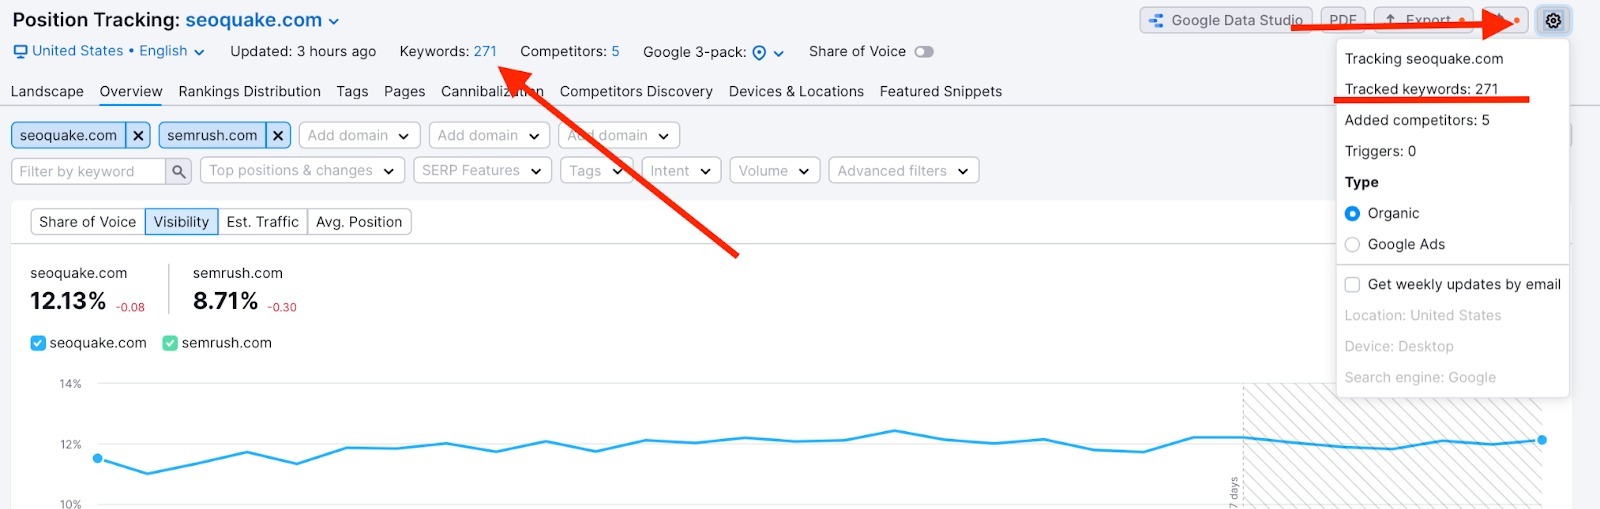 Connecting Position Tracking with Google Analytics image 3